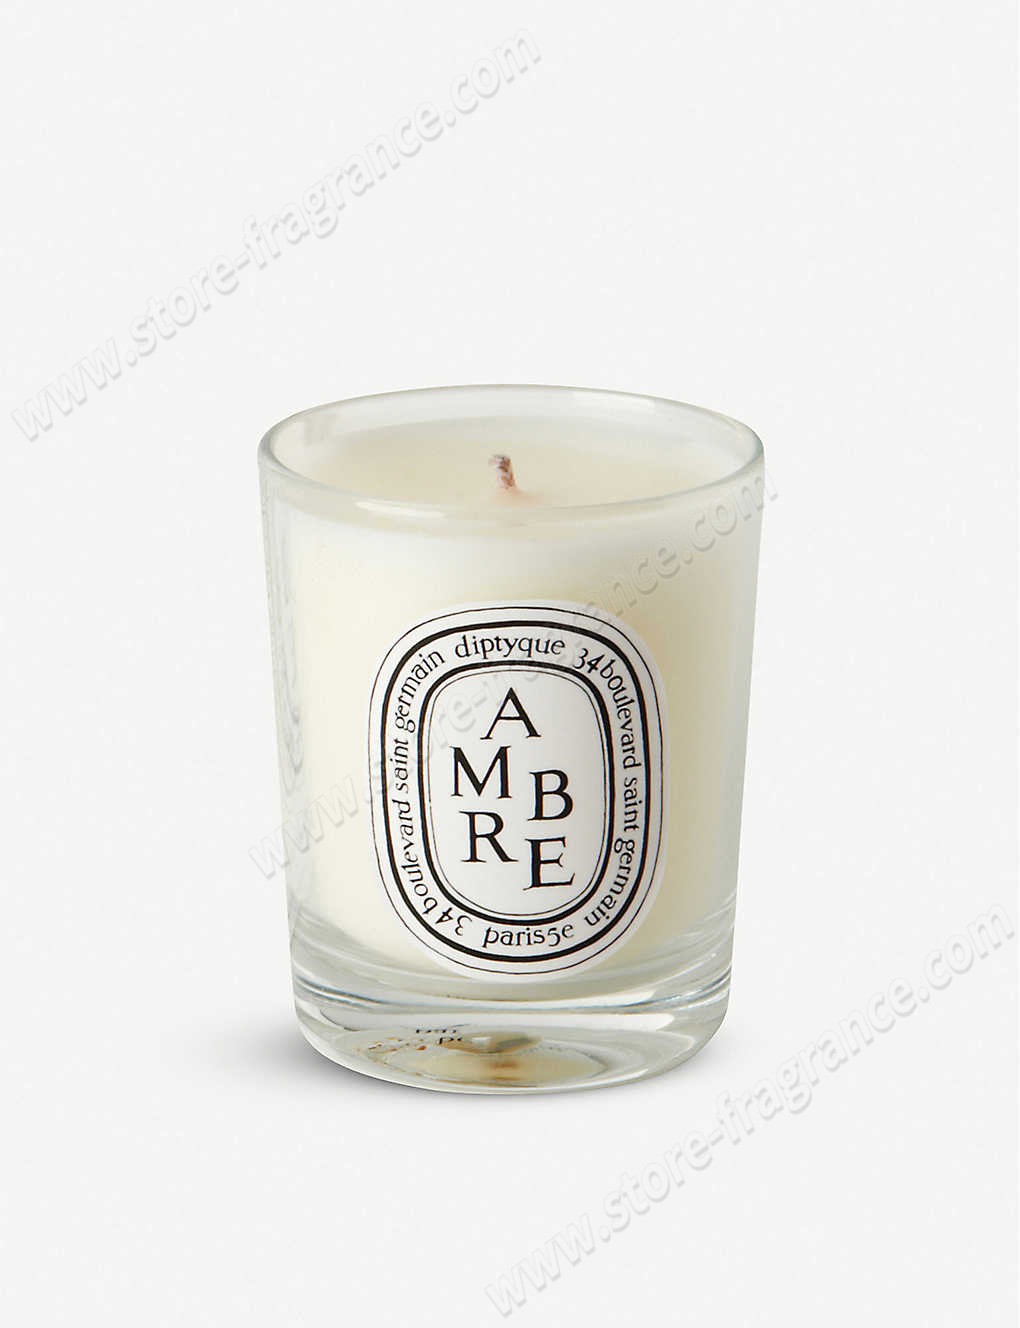 DIPTYQUE/Ambre scented candle 70g ✿ Discount Store - DIPTYQUE/Ambre scented candle 70g ✿ Discount Store